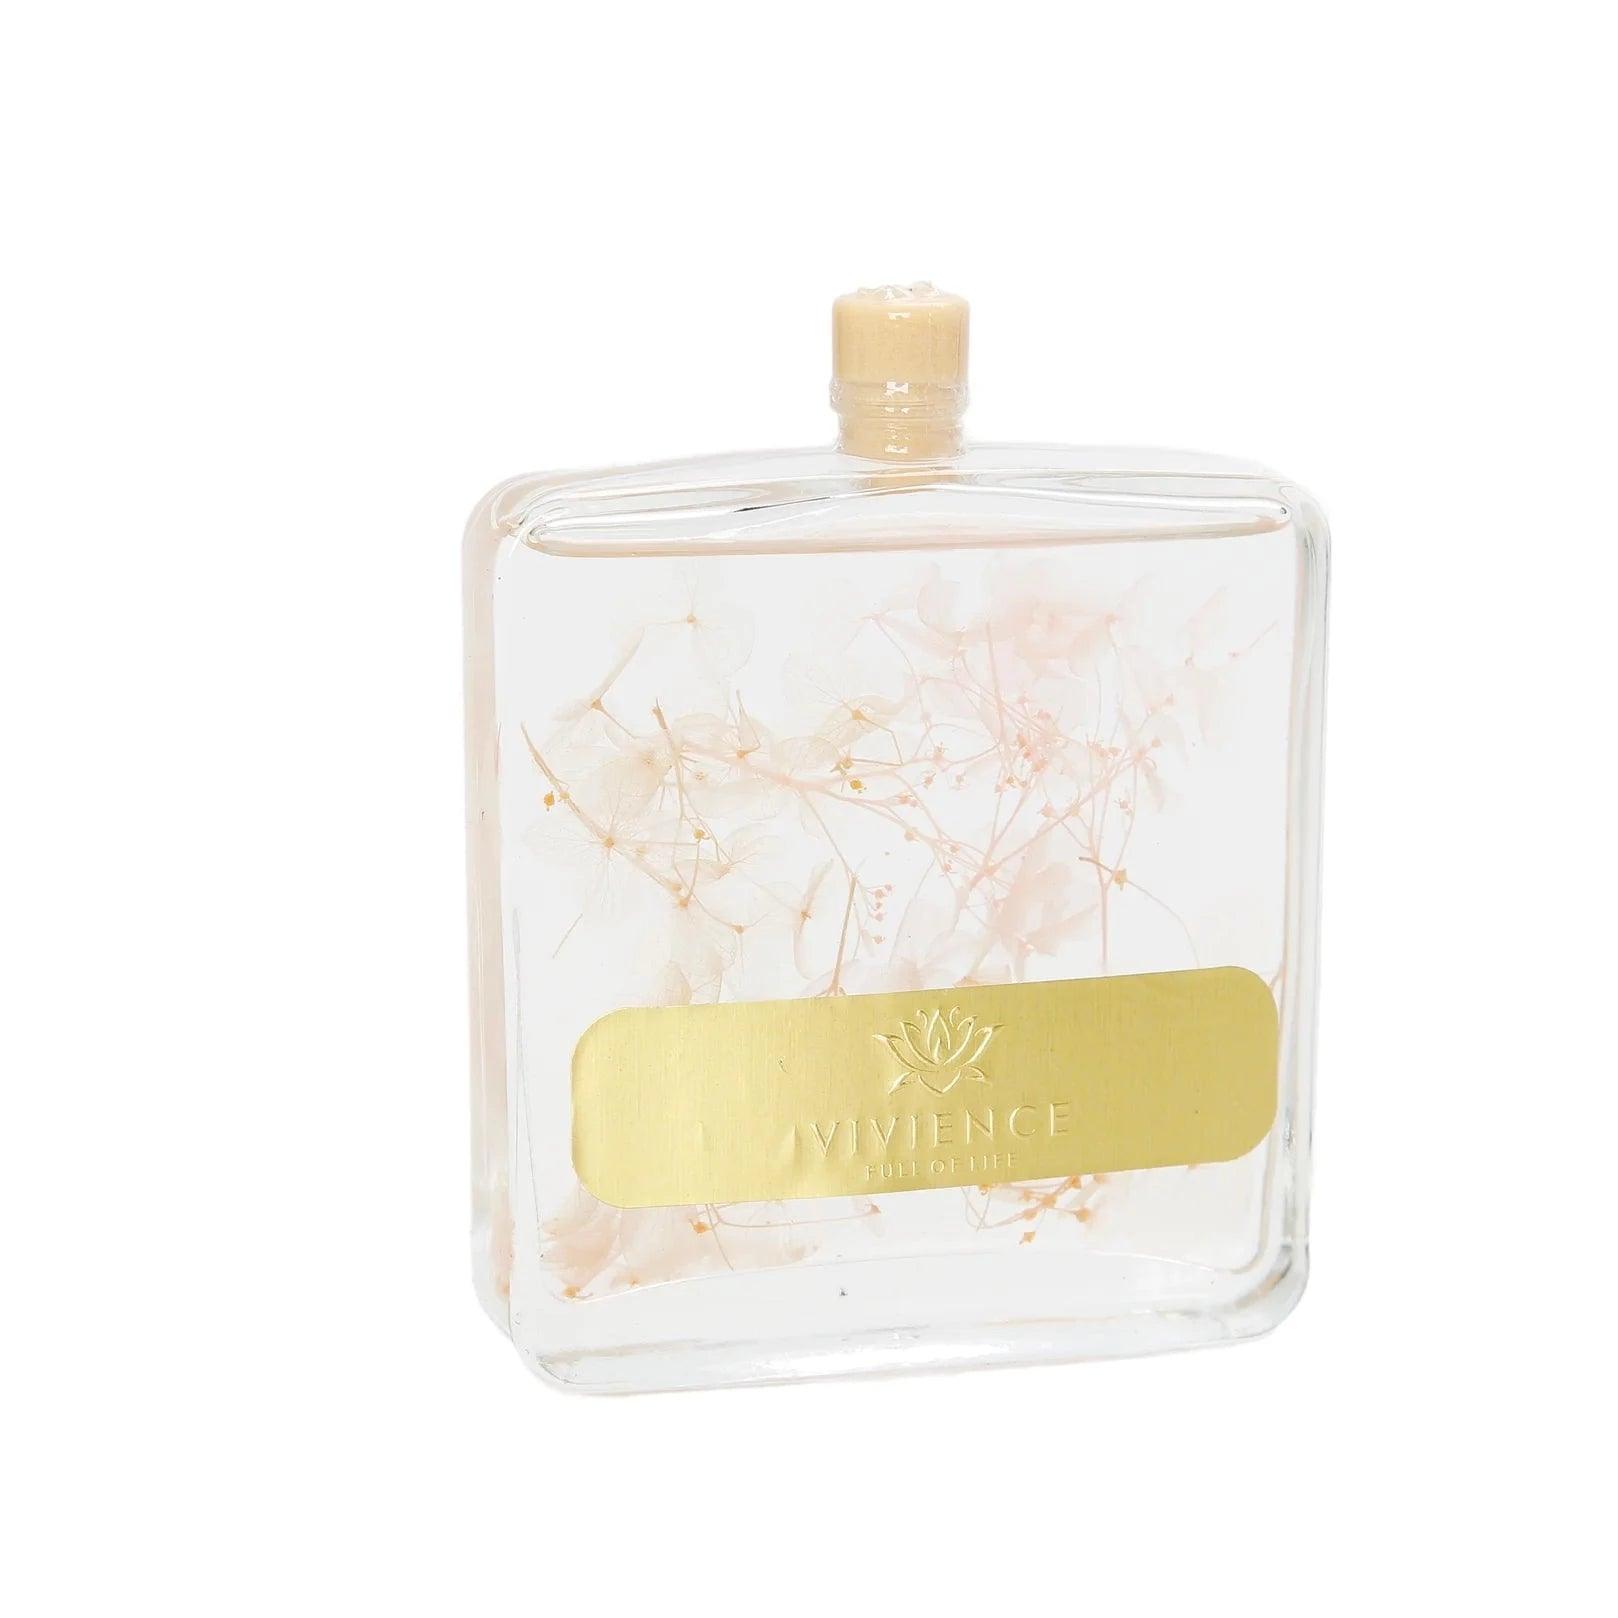 Clear Bottle Reed Diffuser With Pink & White Flower And White Reeds, "Lily Of The Valley" Scent - Elegant Linen